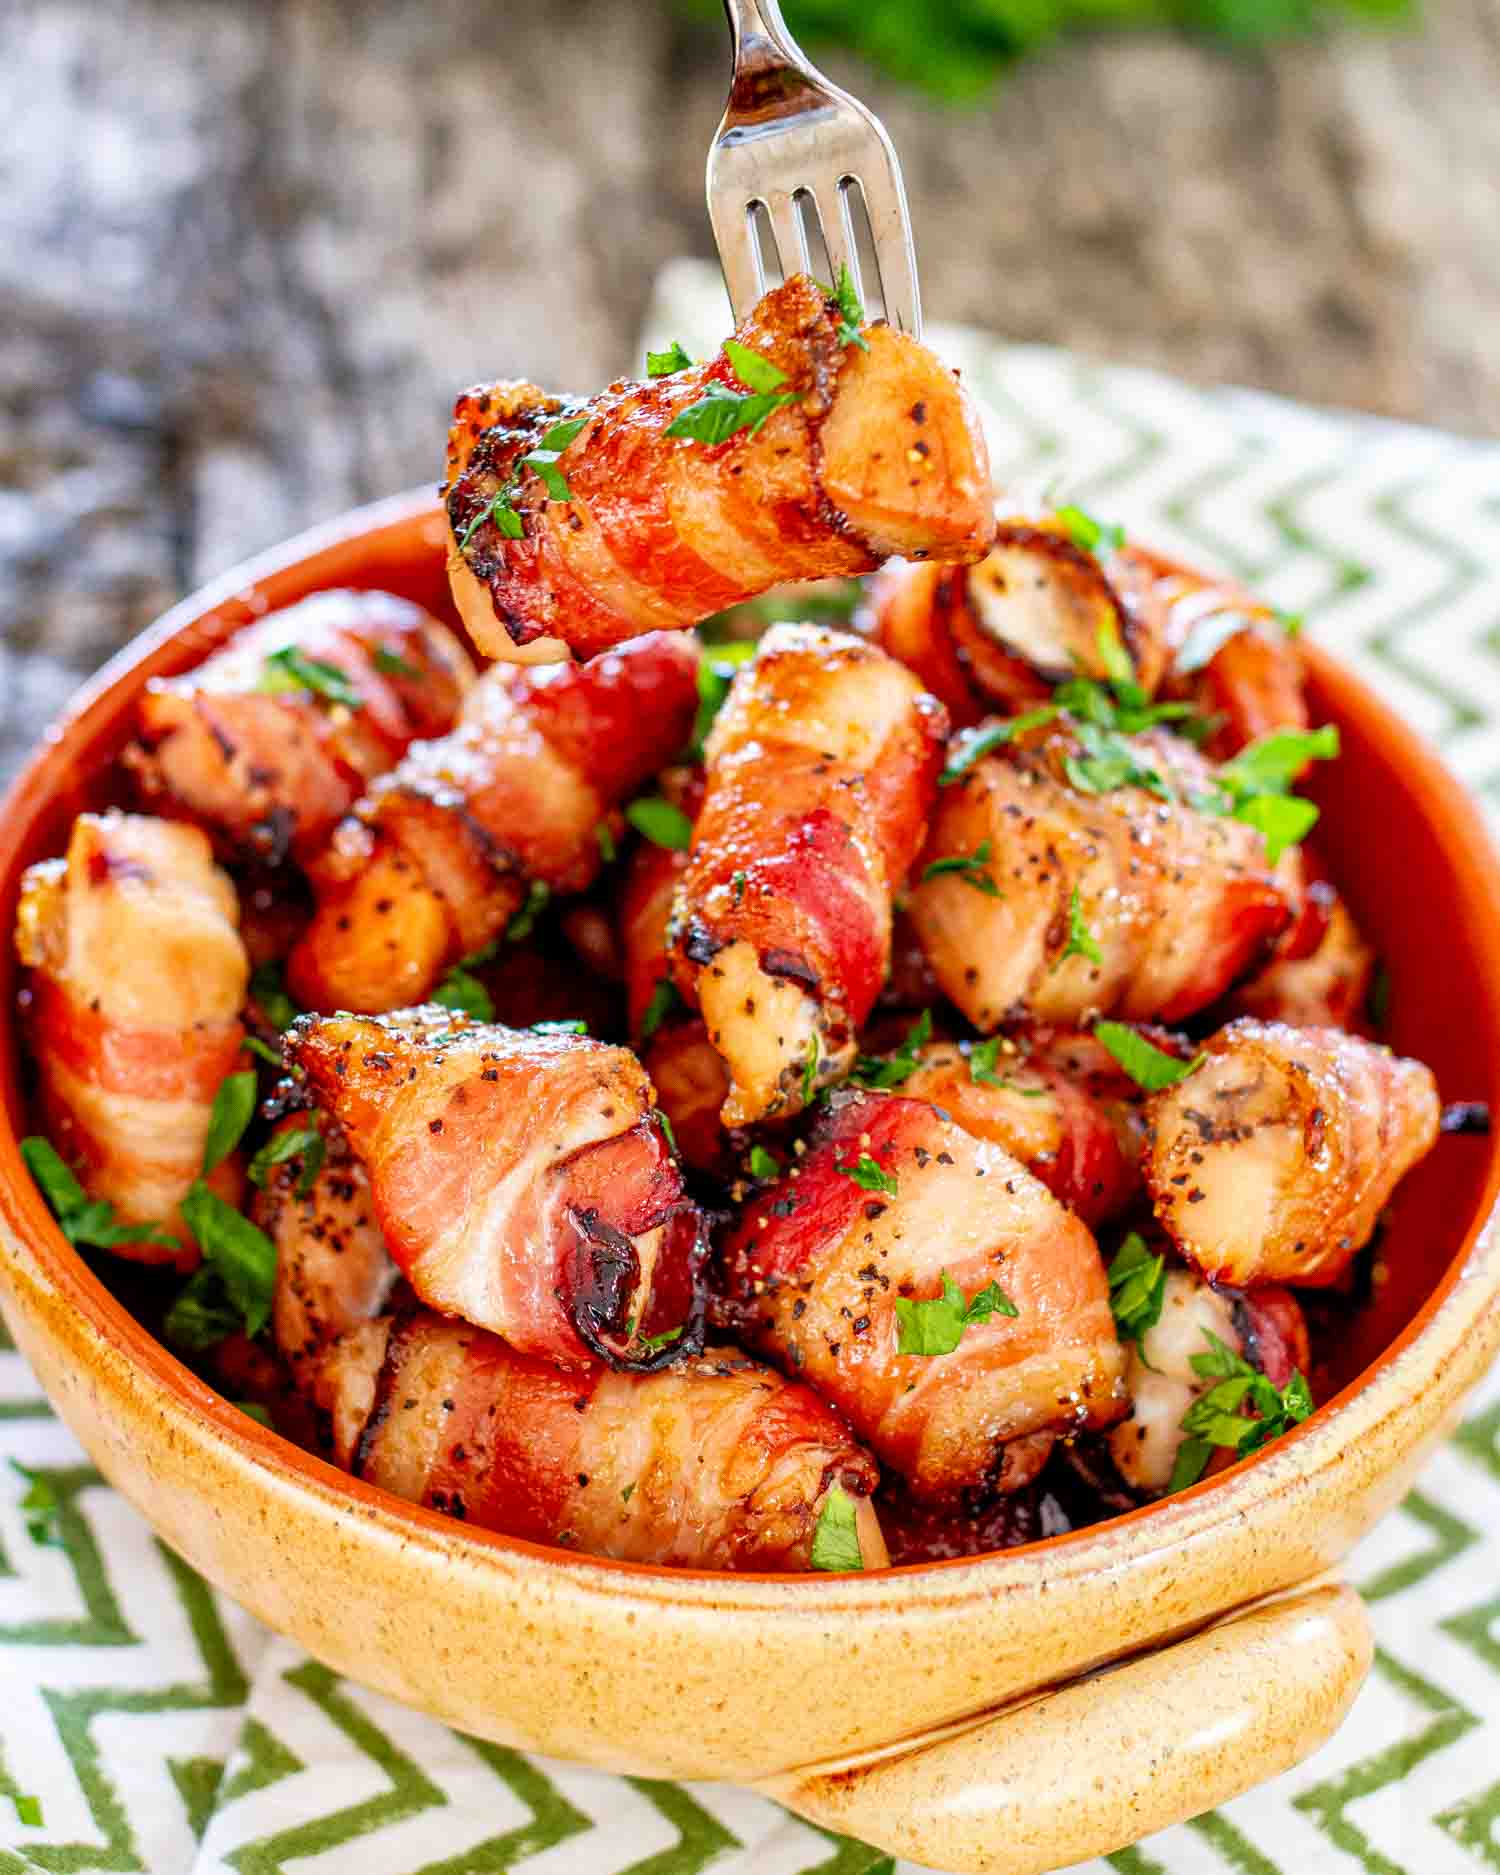 a few bacon wrapped chicken bites in a clay bowl garnished with parsley.